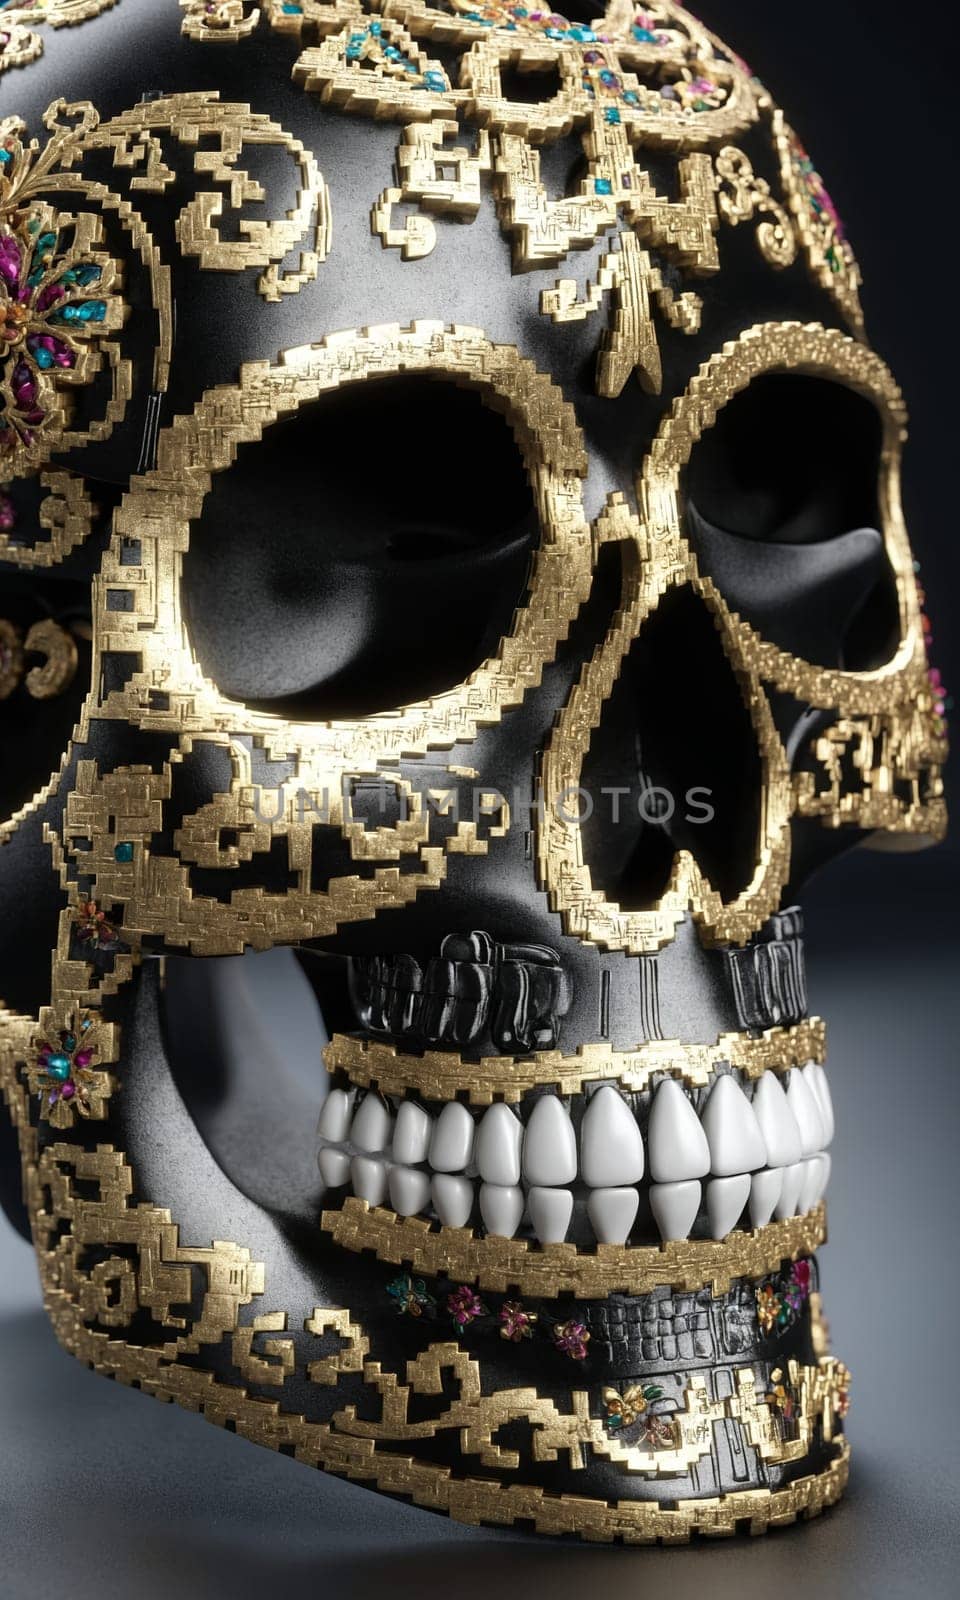 black and white image of a sugar skull on a black background